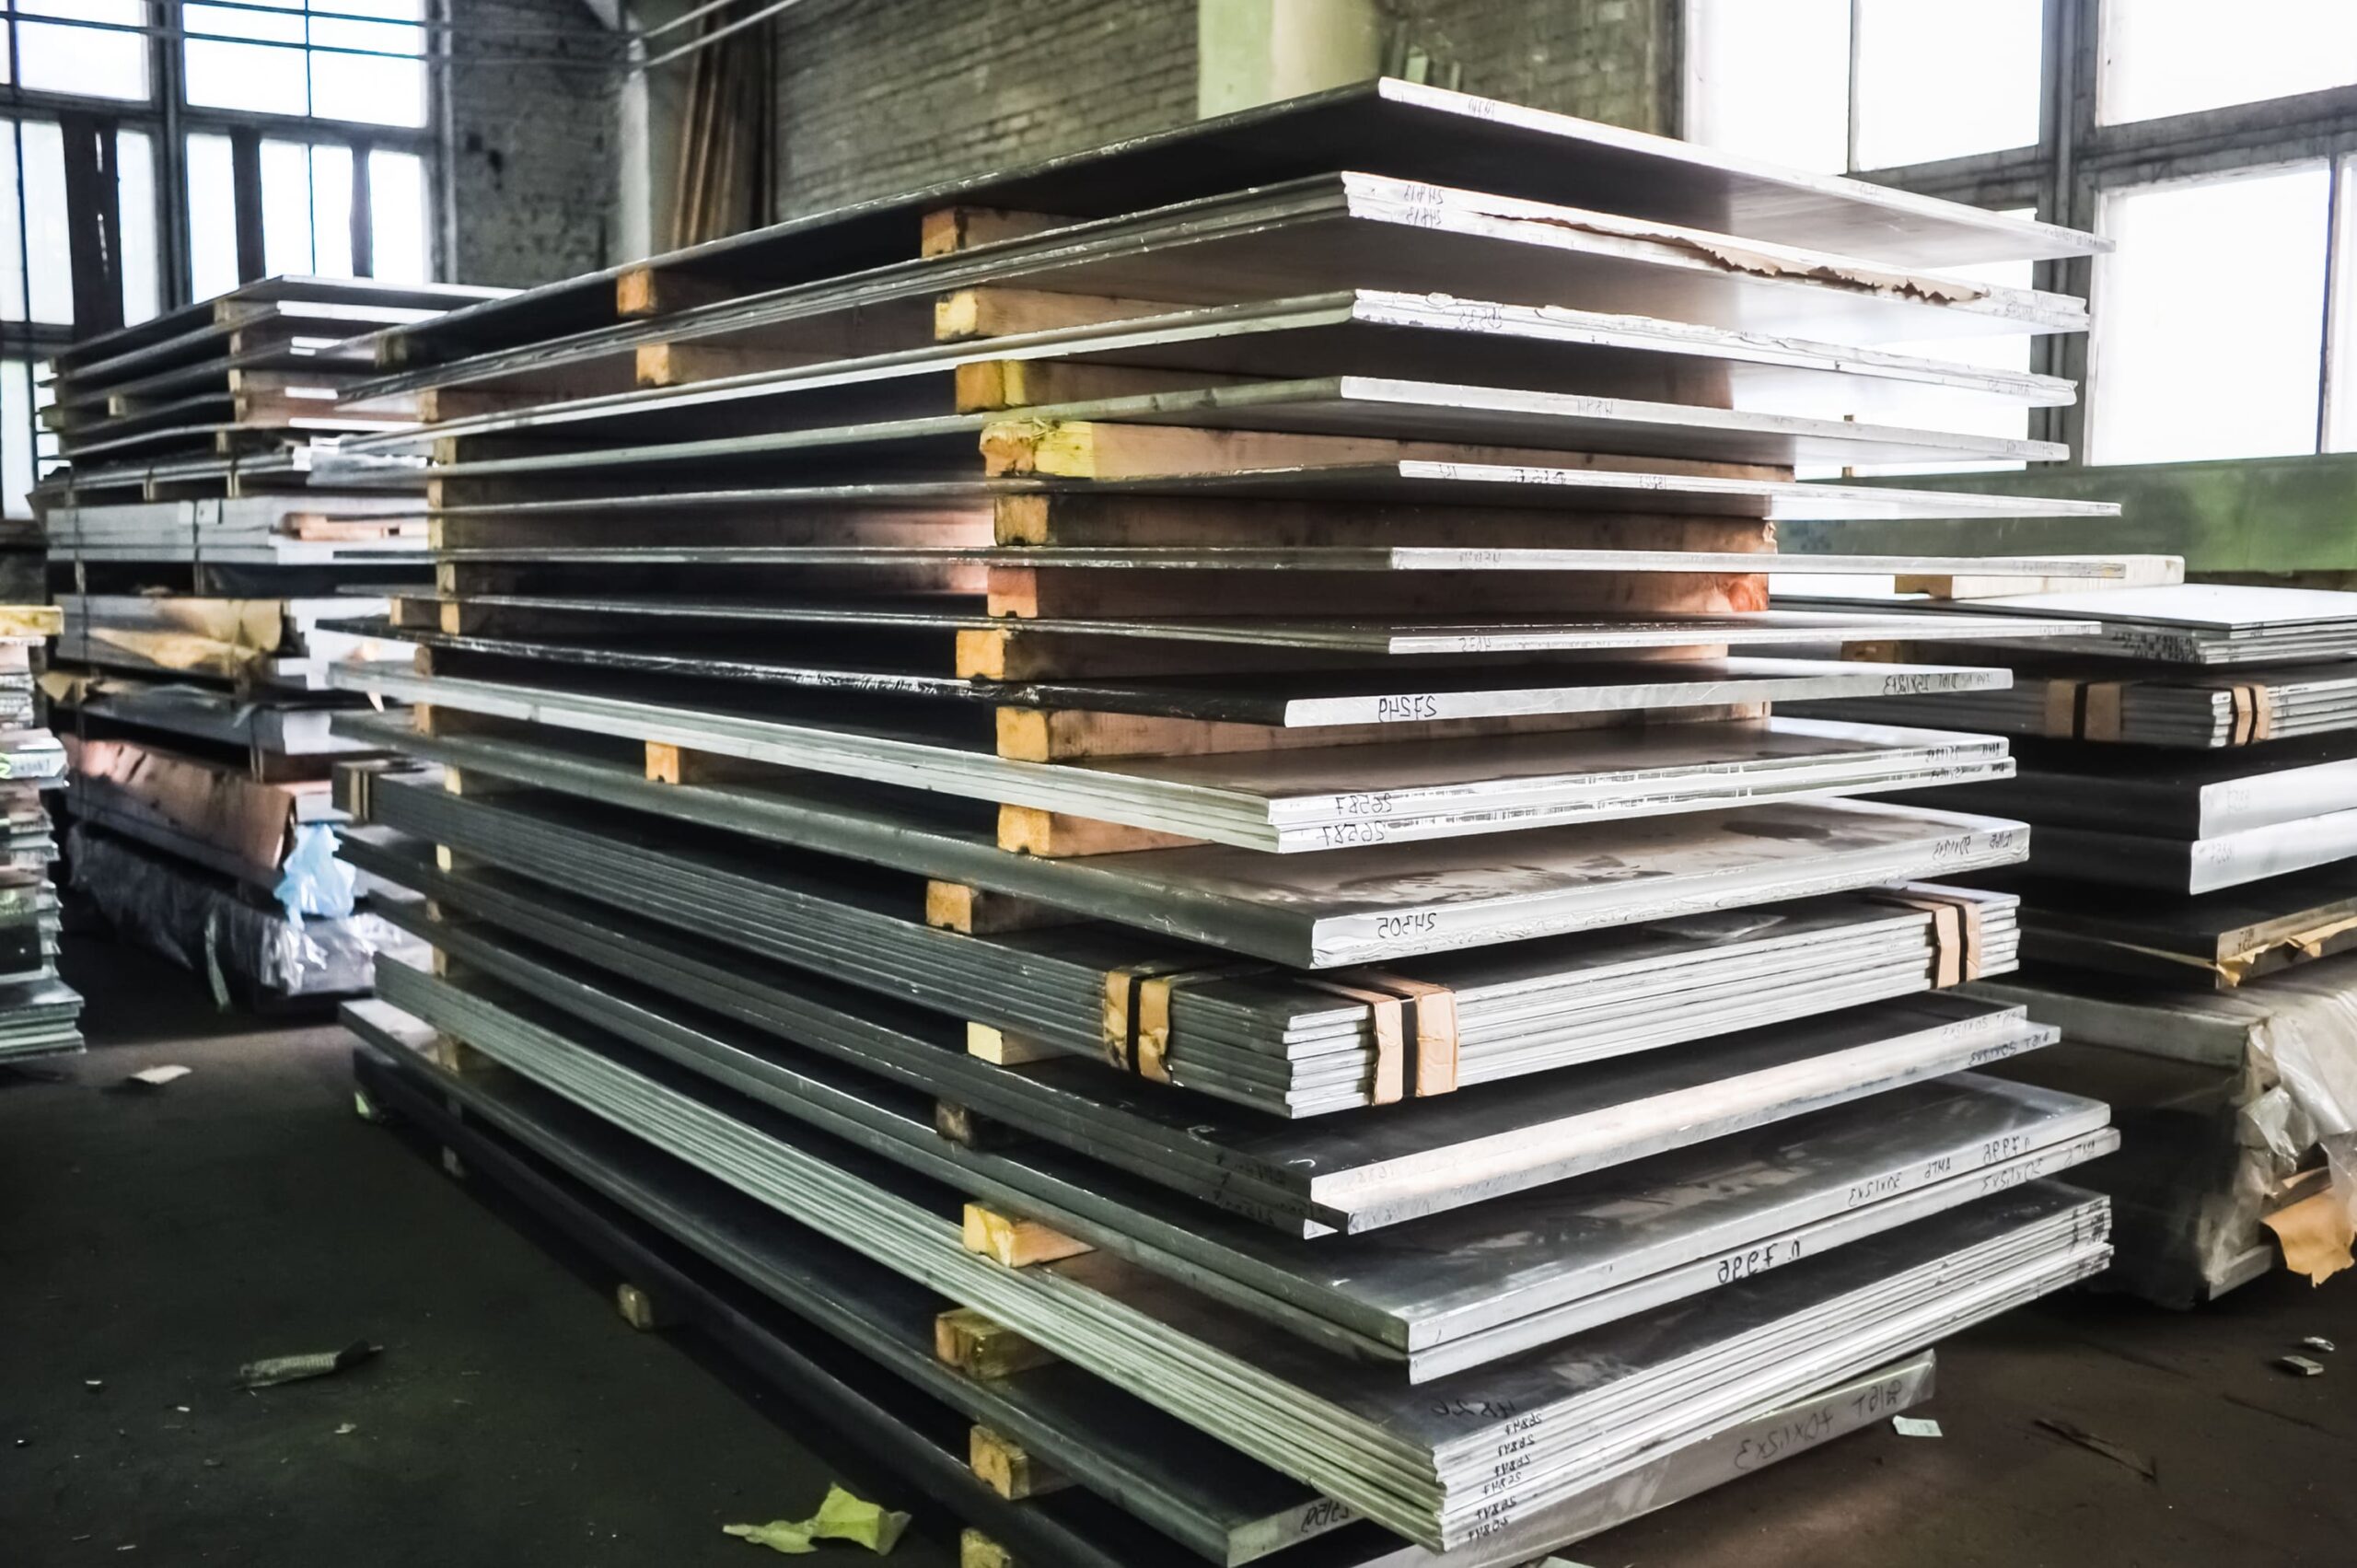 Sheets of steel stacked high, a variety of widths